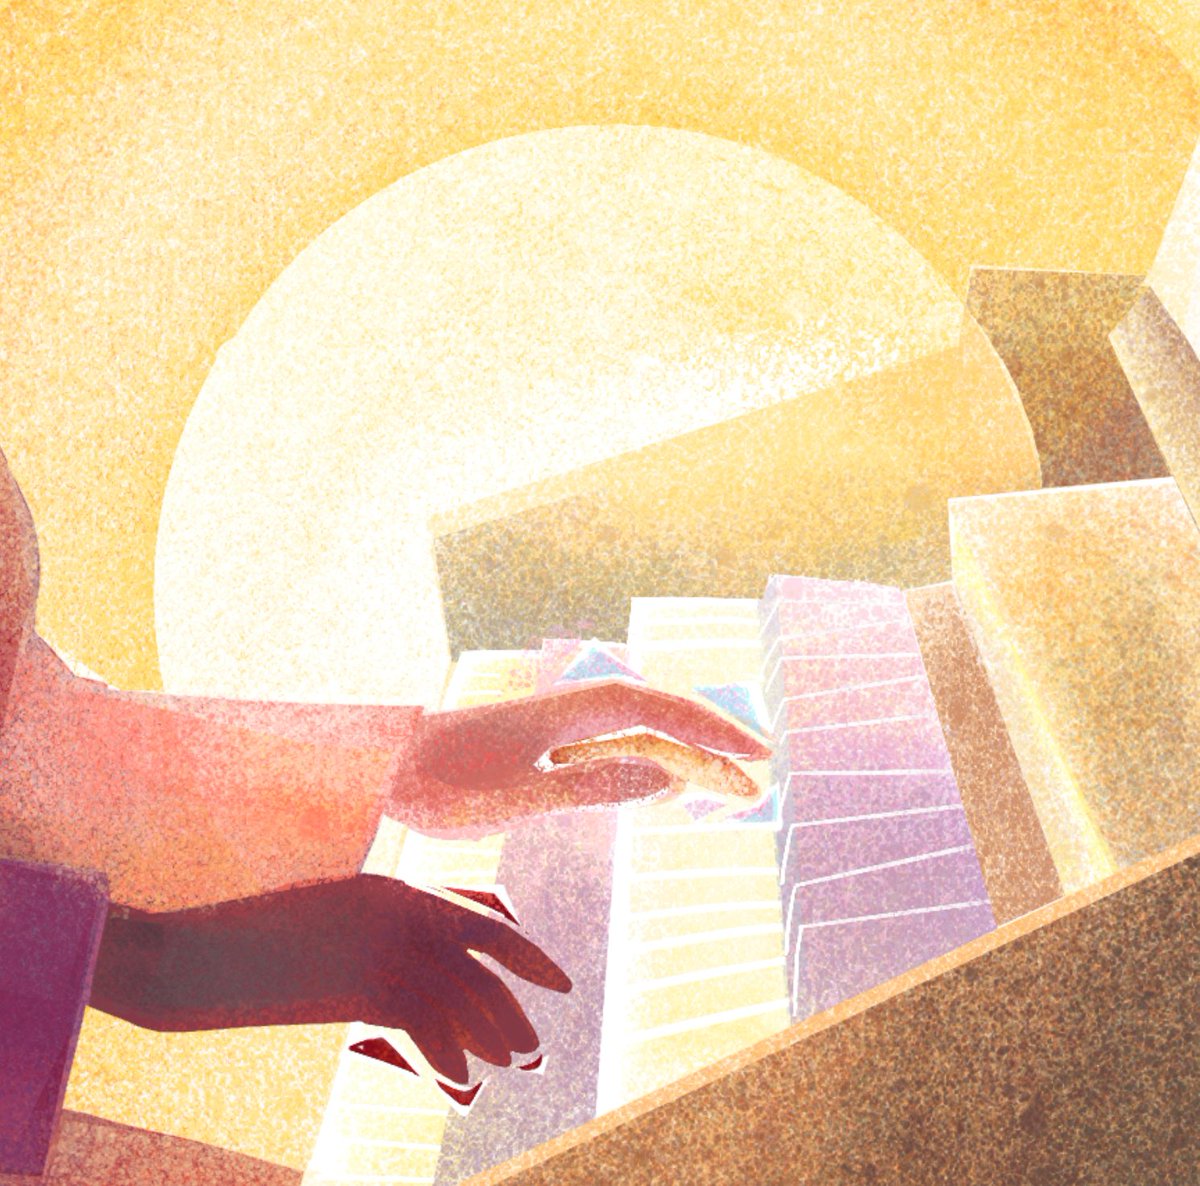 #BHM2021 is coming to a close and I wanted to pay tribute to a key figure in #blackhistory and thats MLK Jr's mother: Alberta Williams King. Alberta King was a teacher, organist, and organizer. . . . #mlk #CivilRights #kidlitart #kidlit #picturebook